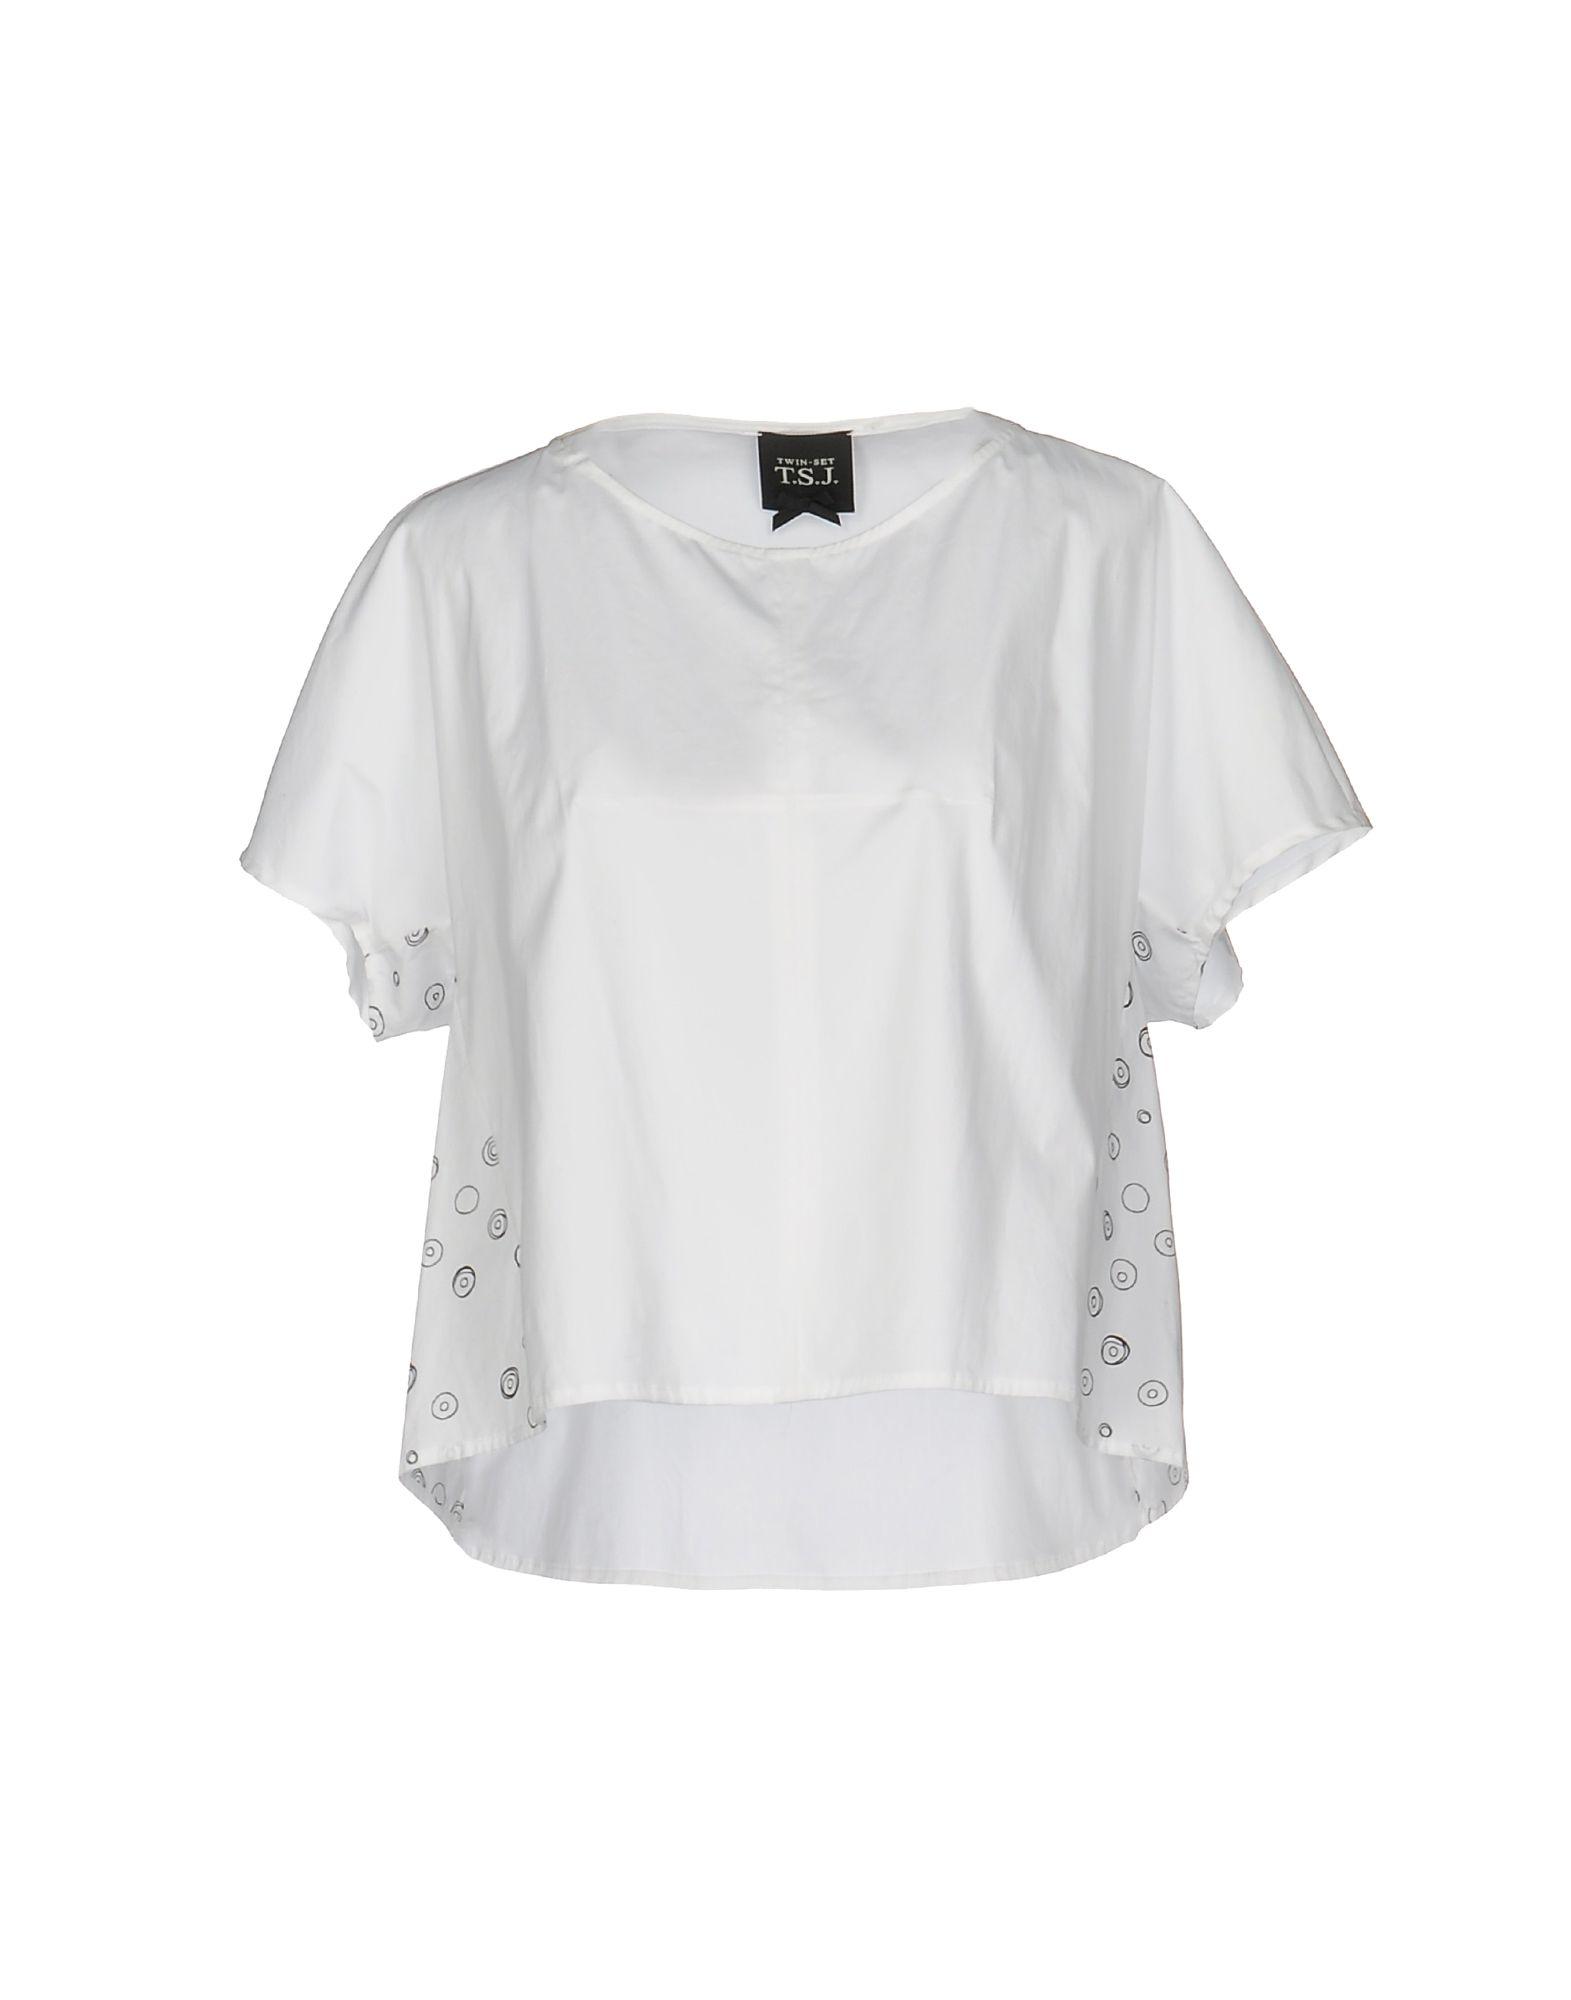 Lyst - Twin set Blouse in White